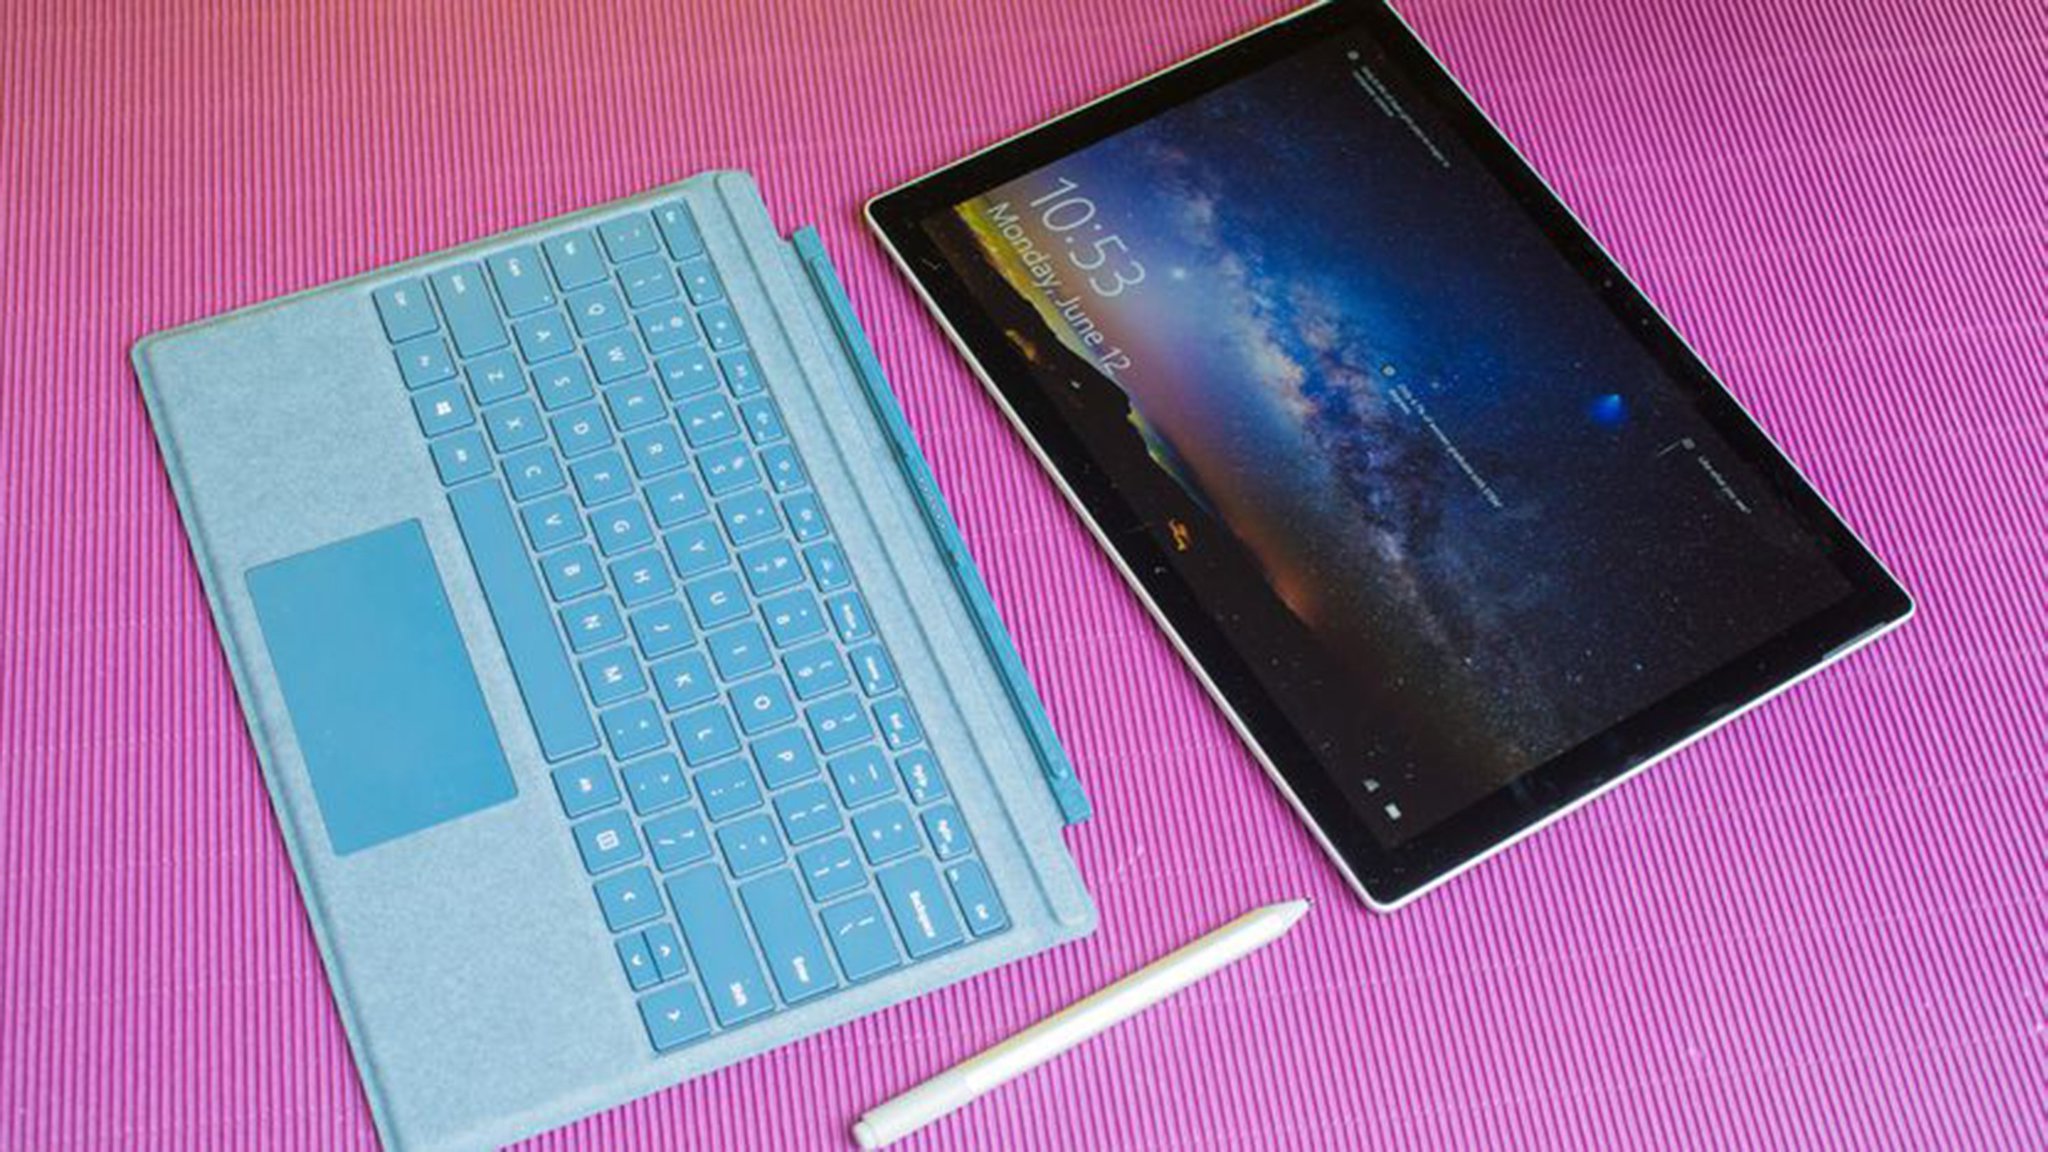 Samsung Galaxy TabPro S Review- 12 Windows 2-in-1 AMOLED Tablet 